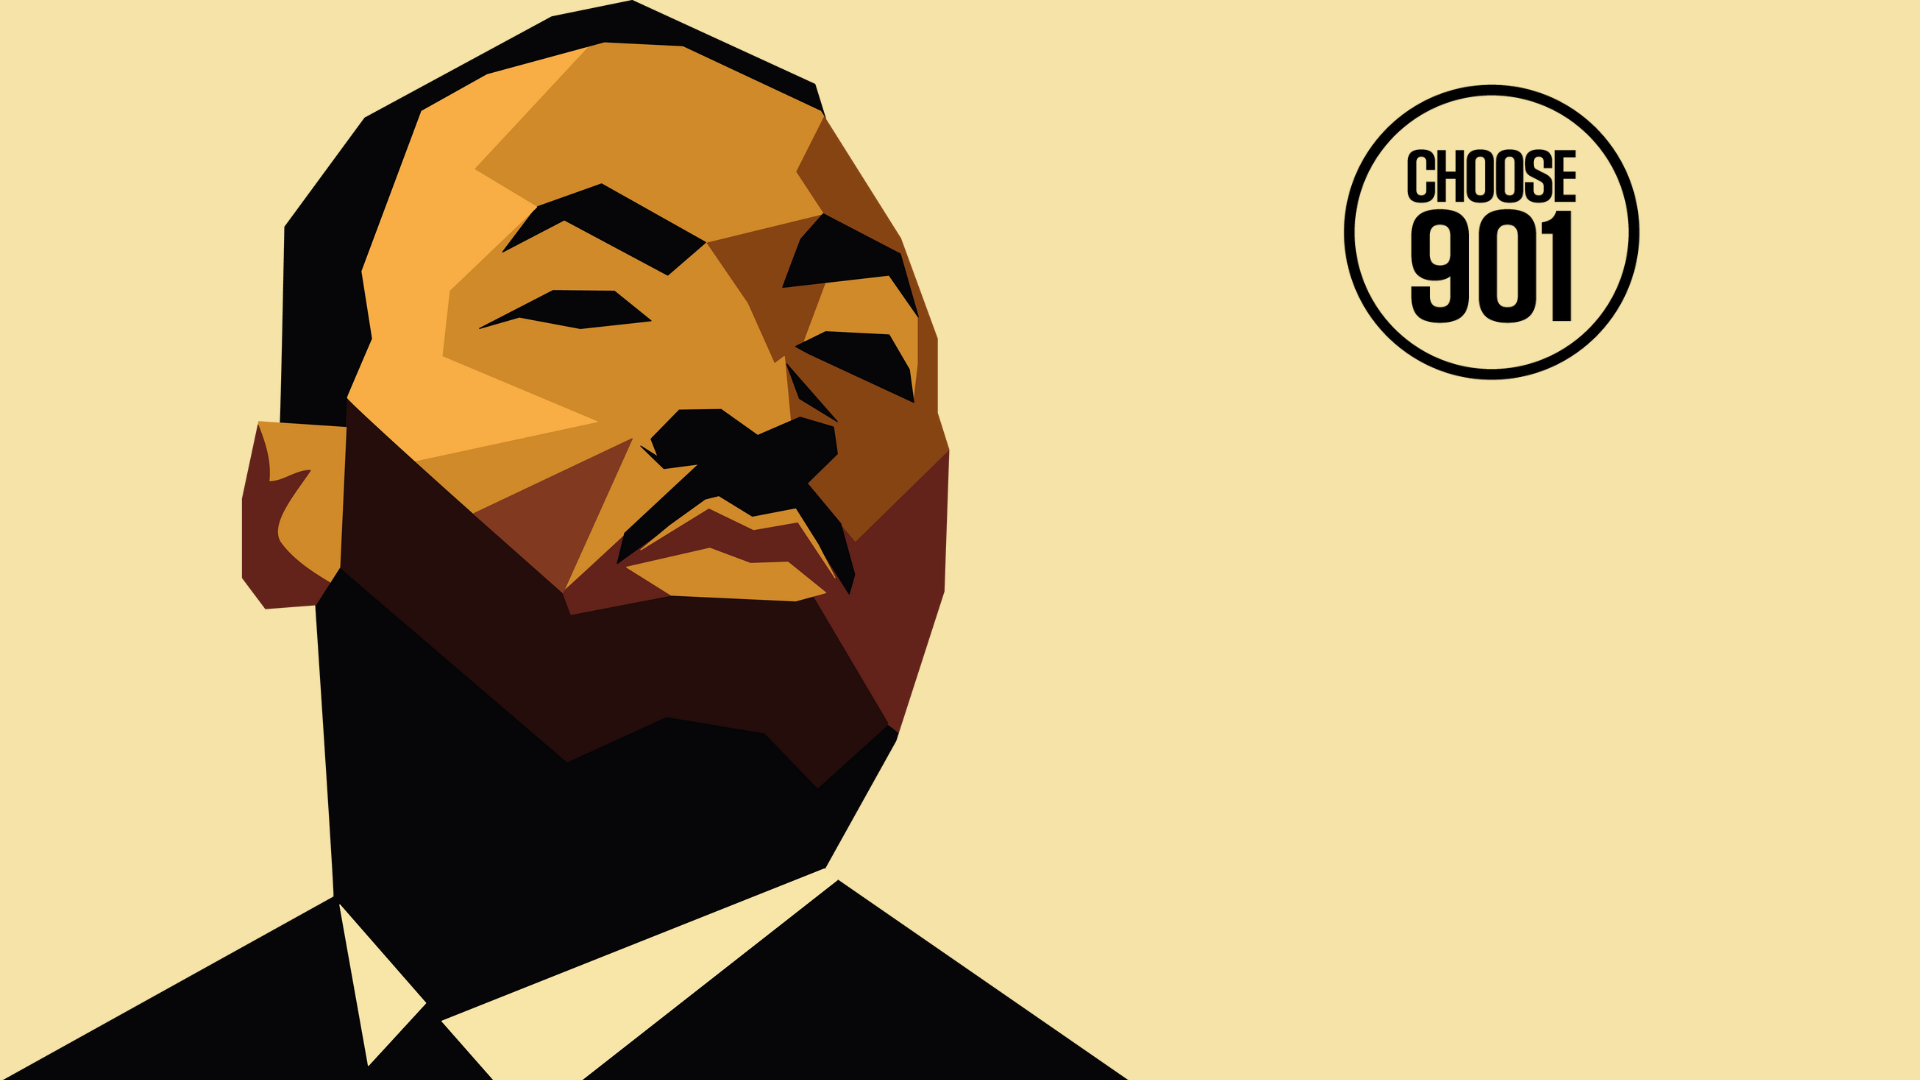 MLK Day in Memphis Honor Dr. Martin Luther King's Legacy Choose901